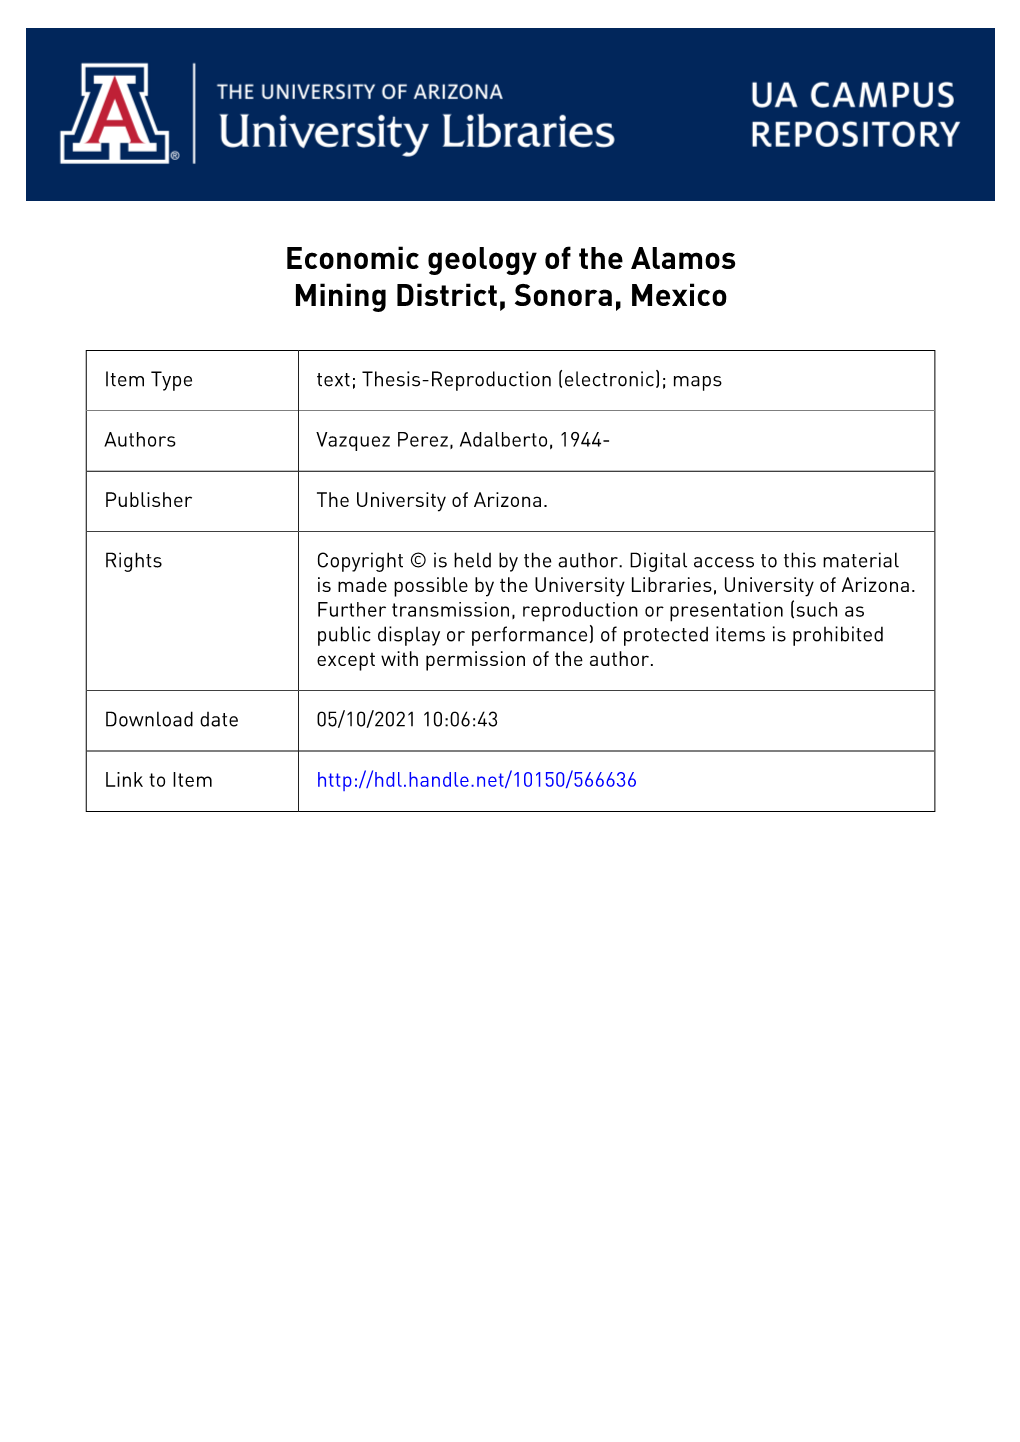 Economic Geology of the Alamos Mining District, Sonora, Mexico